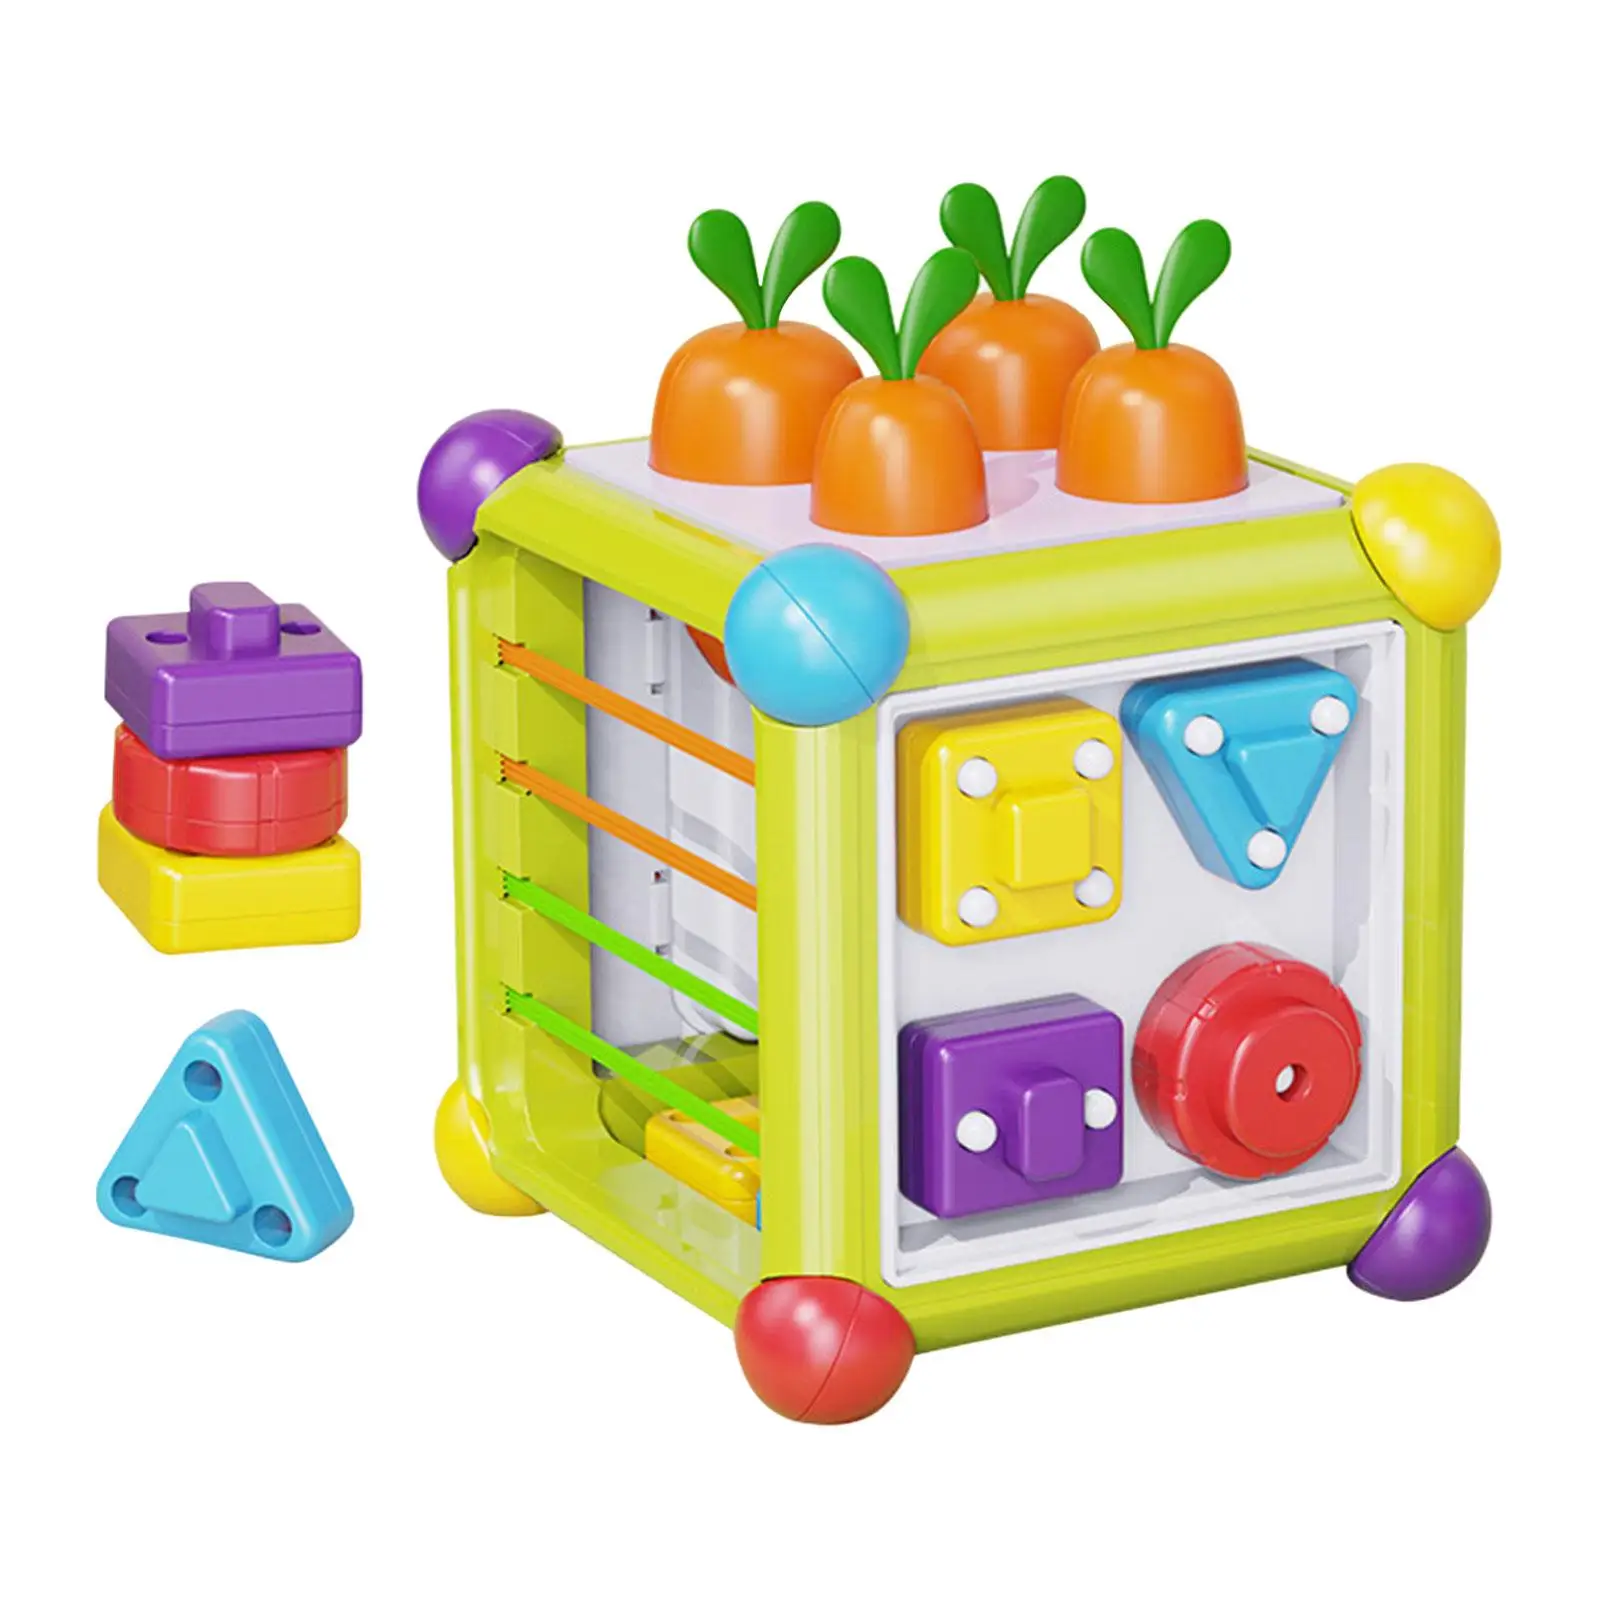 Activity Center Sensory Learning Toys Color Recognition Shape Sorter Toys for Girls Boys Toddlers Kids Baby Birthday Gift